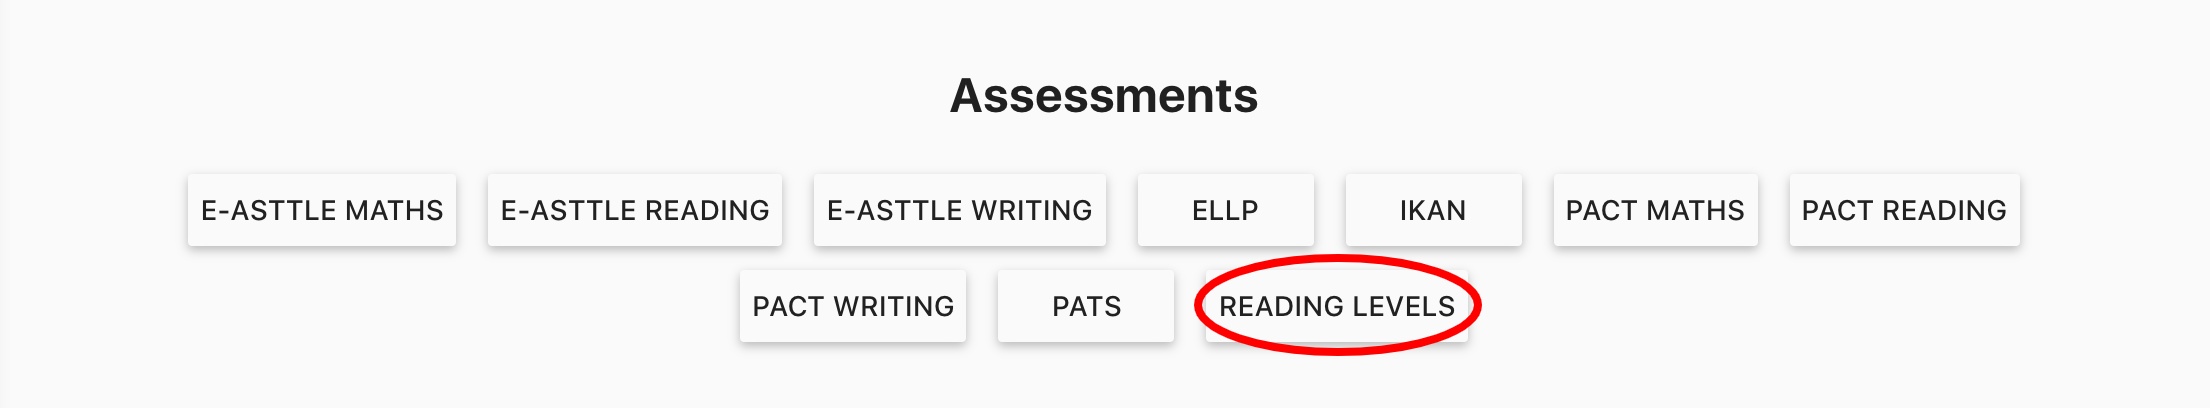 Assessments_reading_levels.png